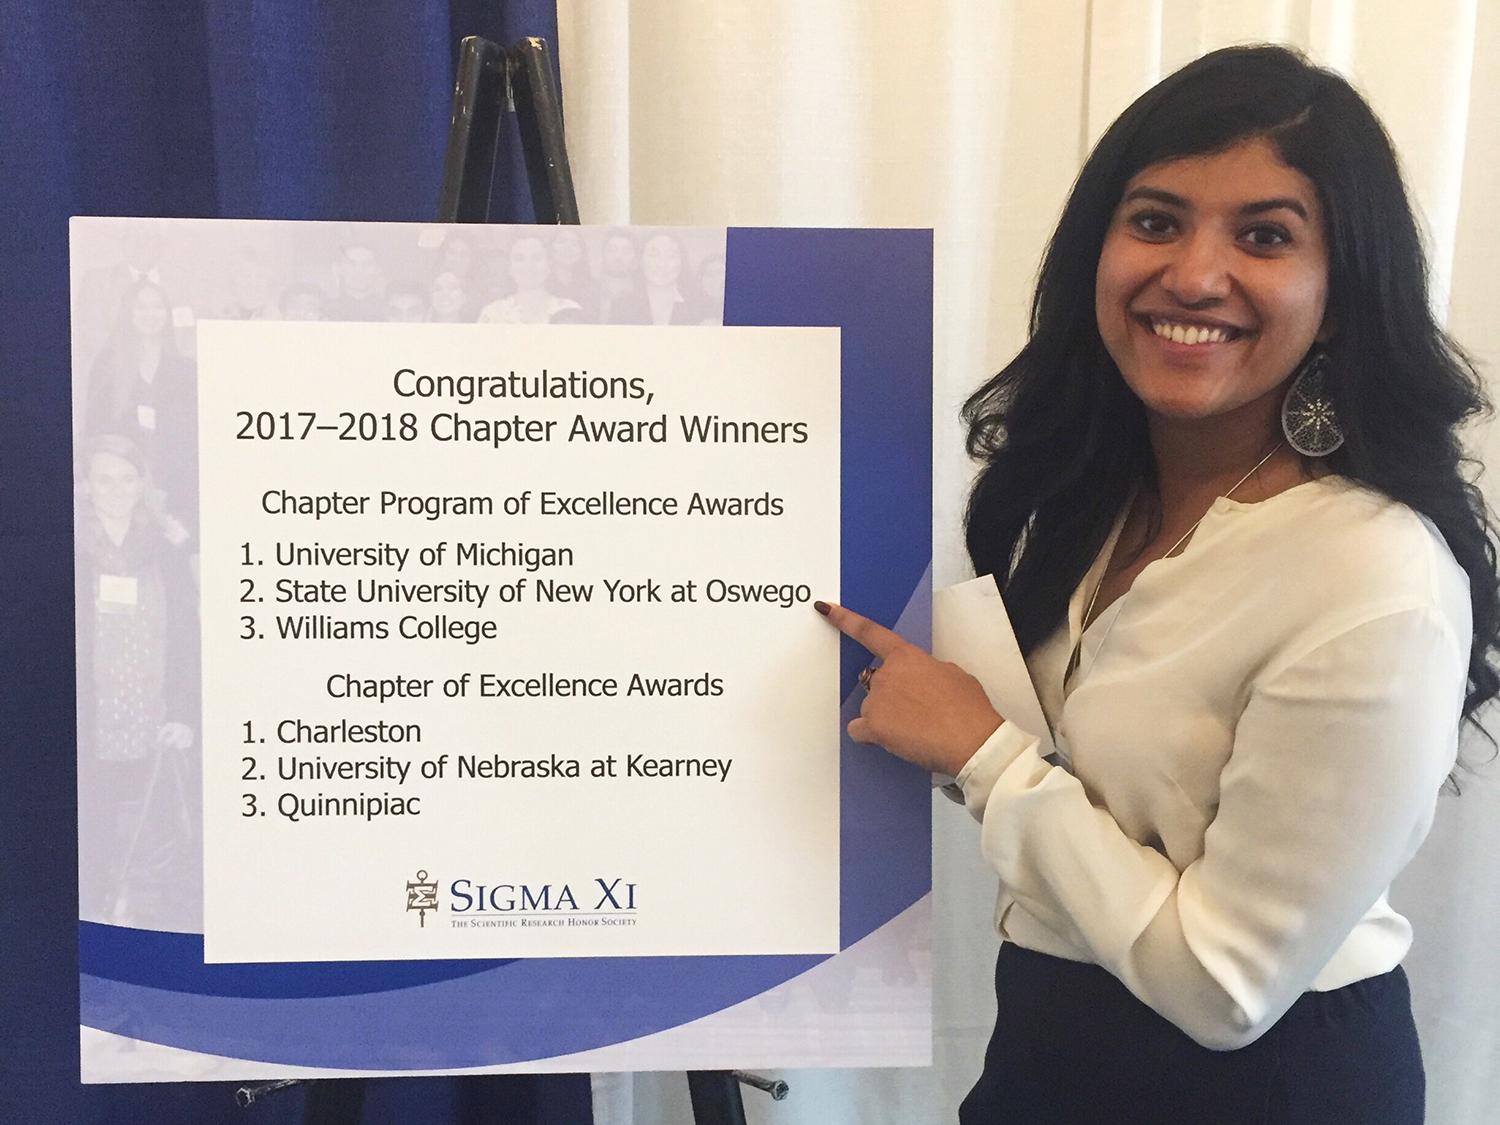 Manna Job shows pride in college's research accomplishments at Sigma Xi international conference